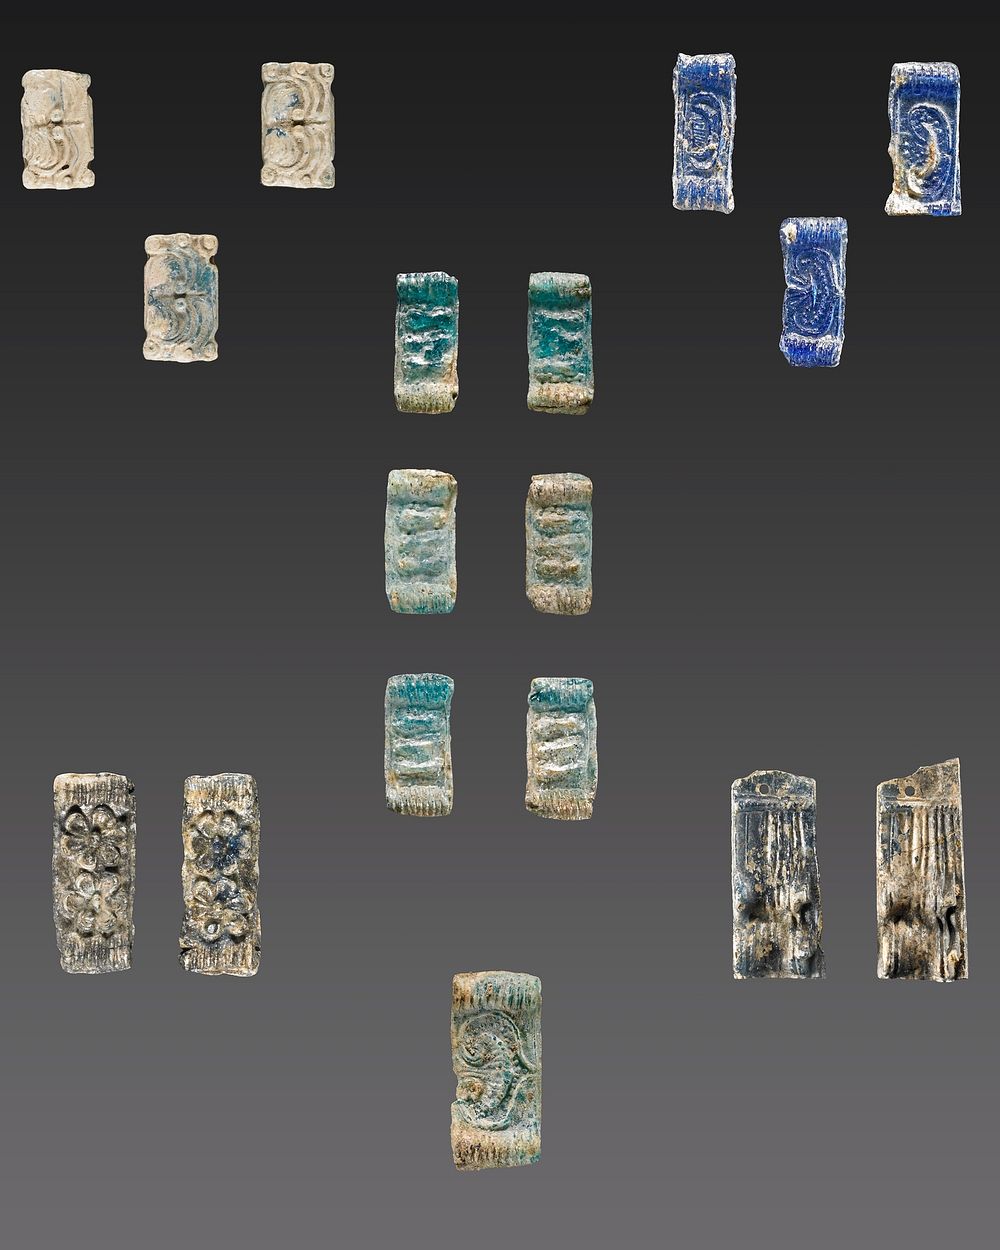 Group of Cast Pendant Beads (17)